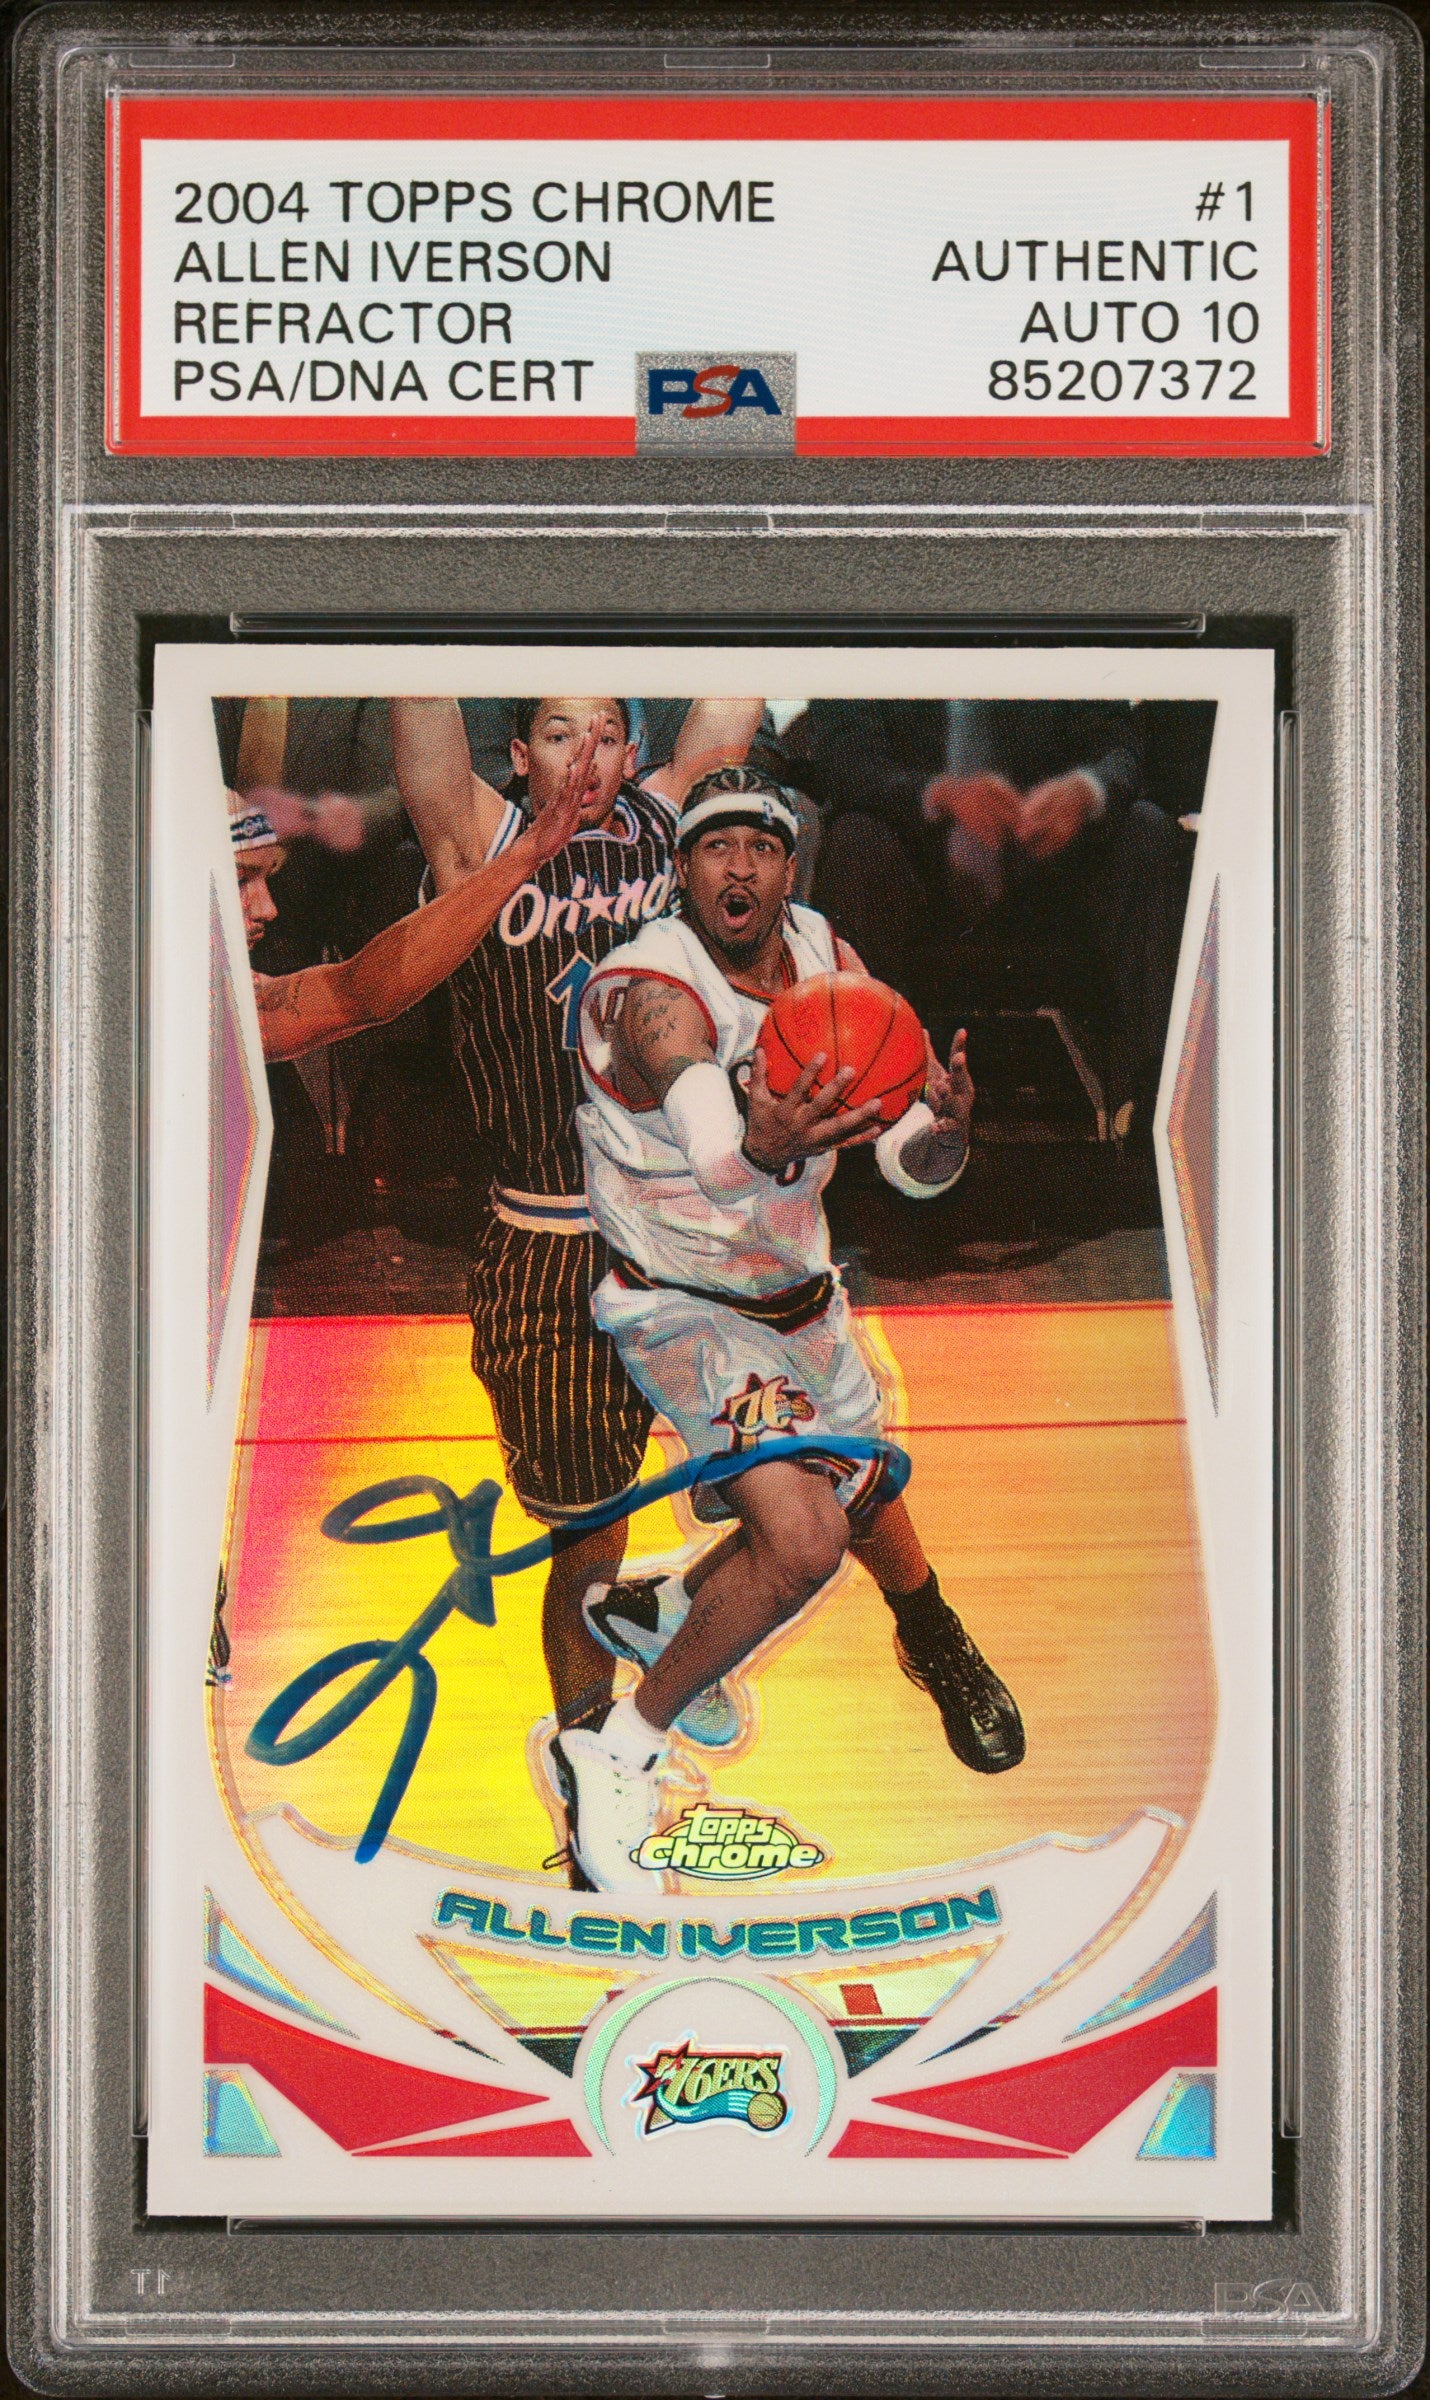 Allen Iverson 2004 Topps Chrome Refractor Signed Card #1 Auto Graded PSA 10 7372